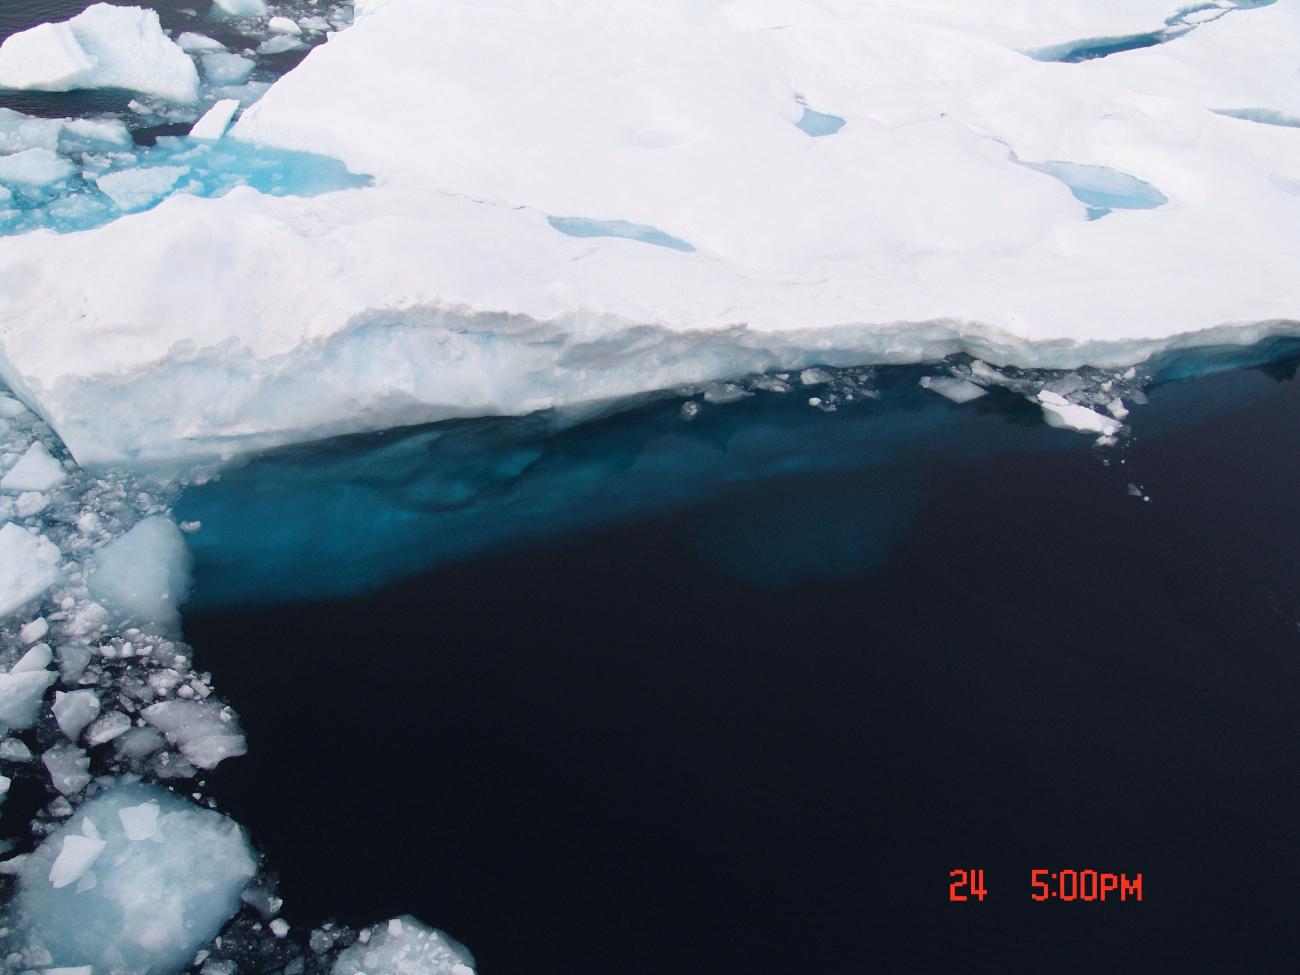 A large aquamarine keel is apparent on the edge of a multi-year ice floe